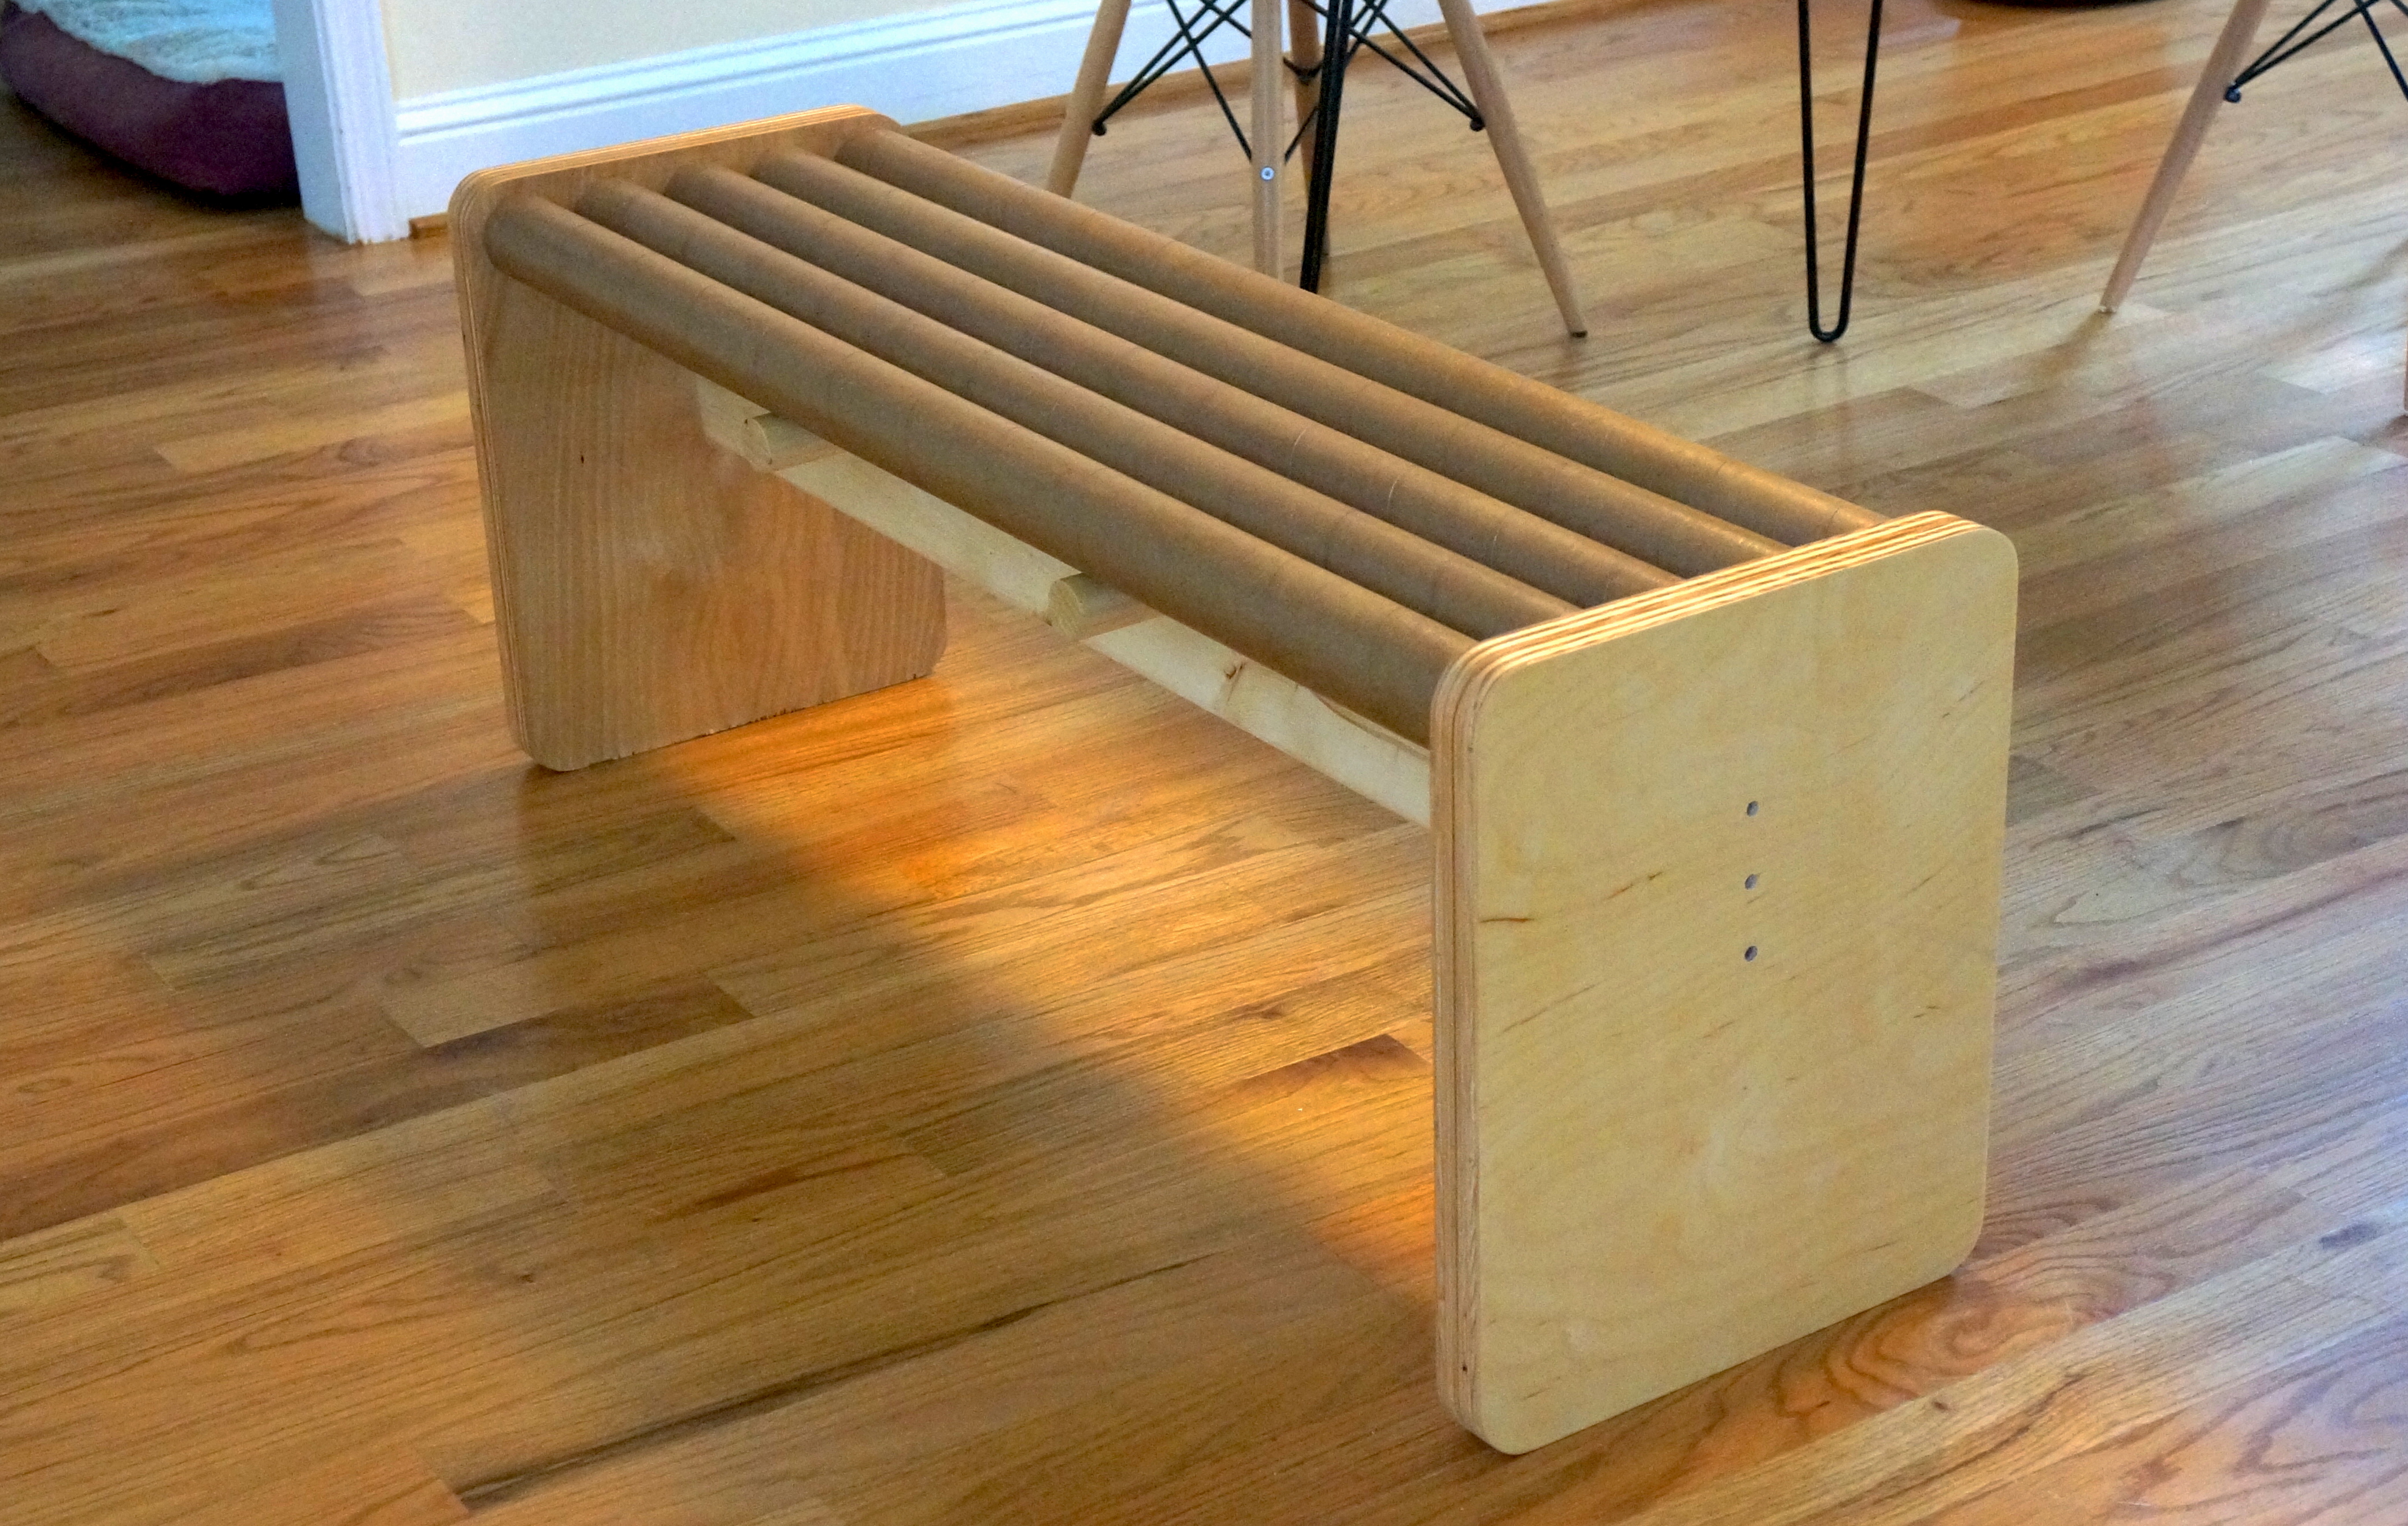 Build a Modern Bench With Cardboard Tubes